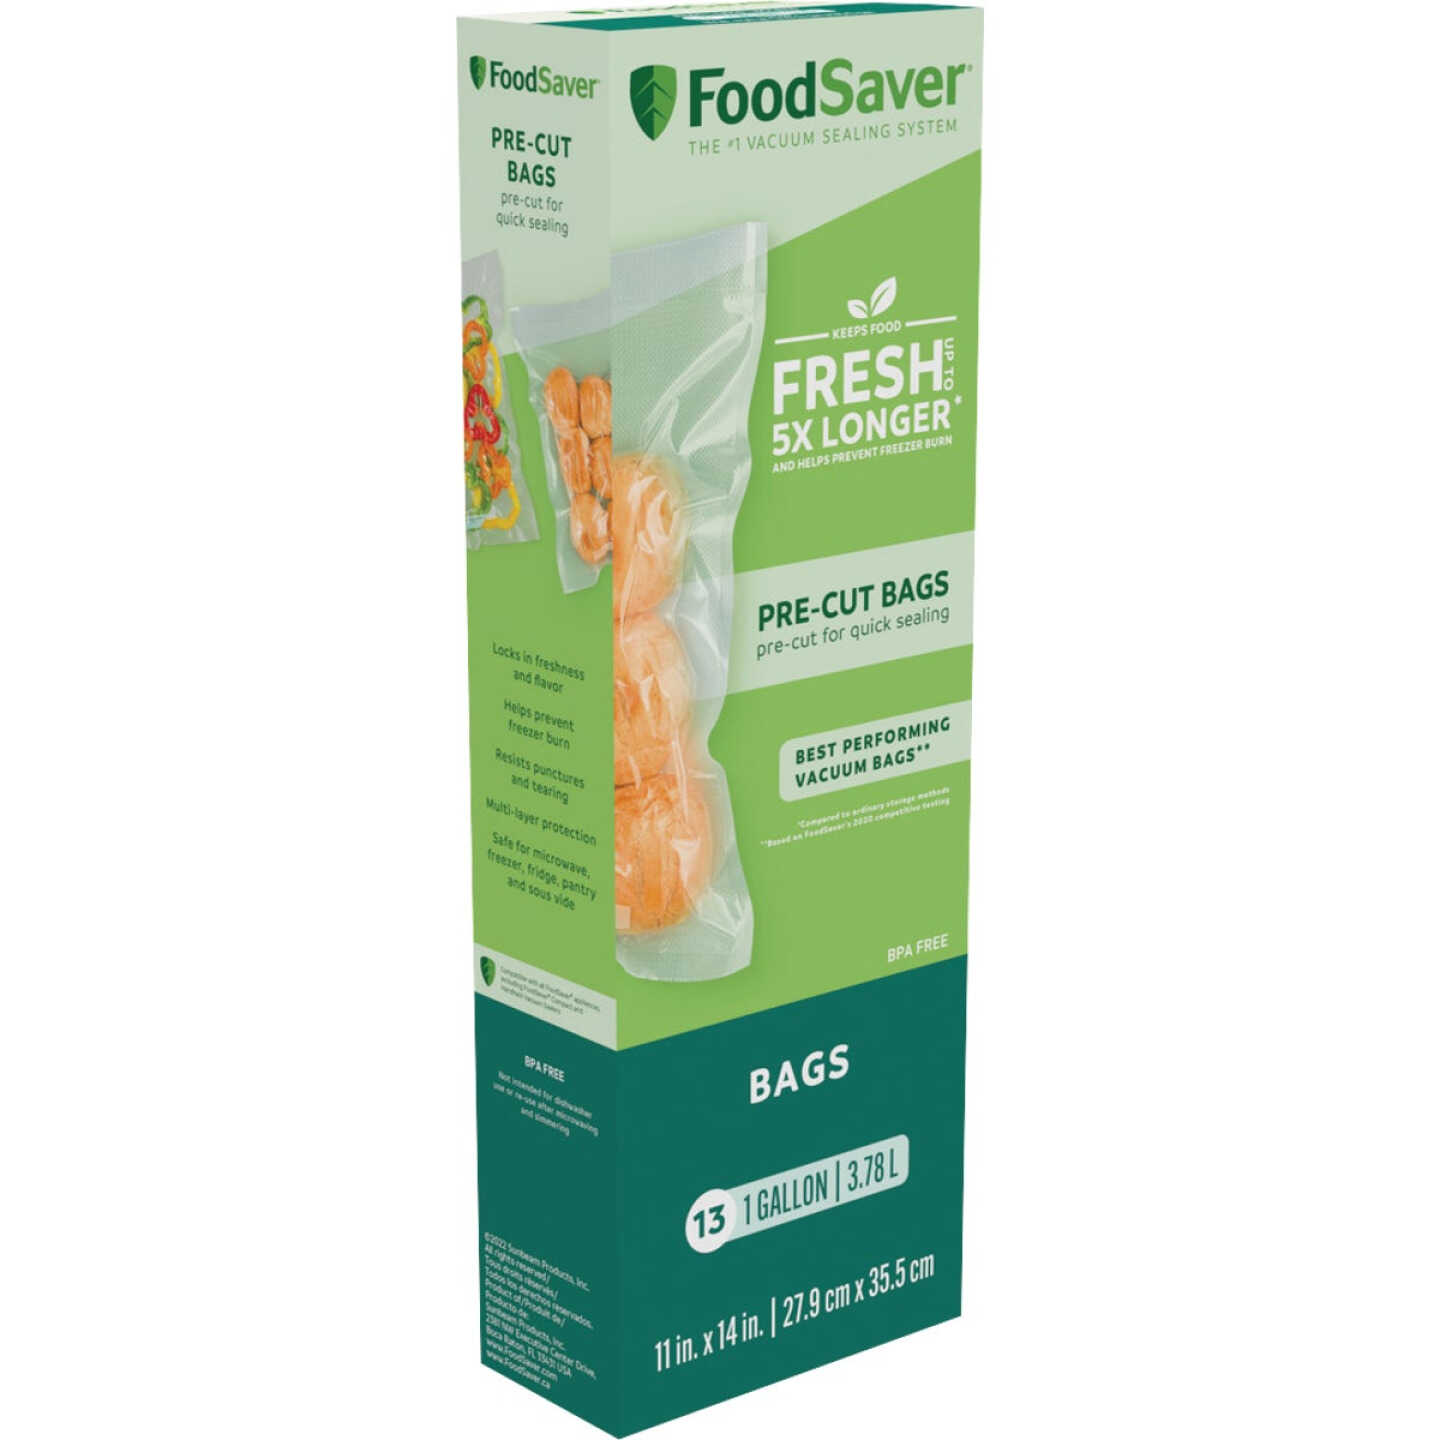 FoodSaver 1 Gal. Freezer Bag (13-Count) - Power Townsend Company